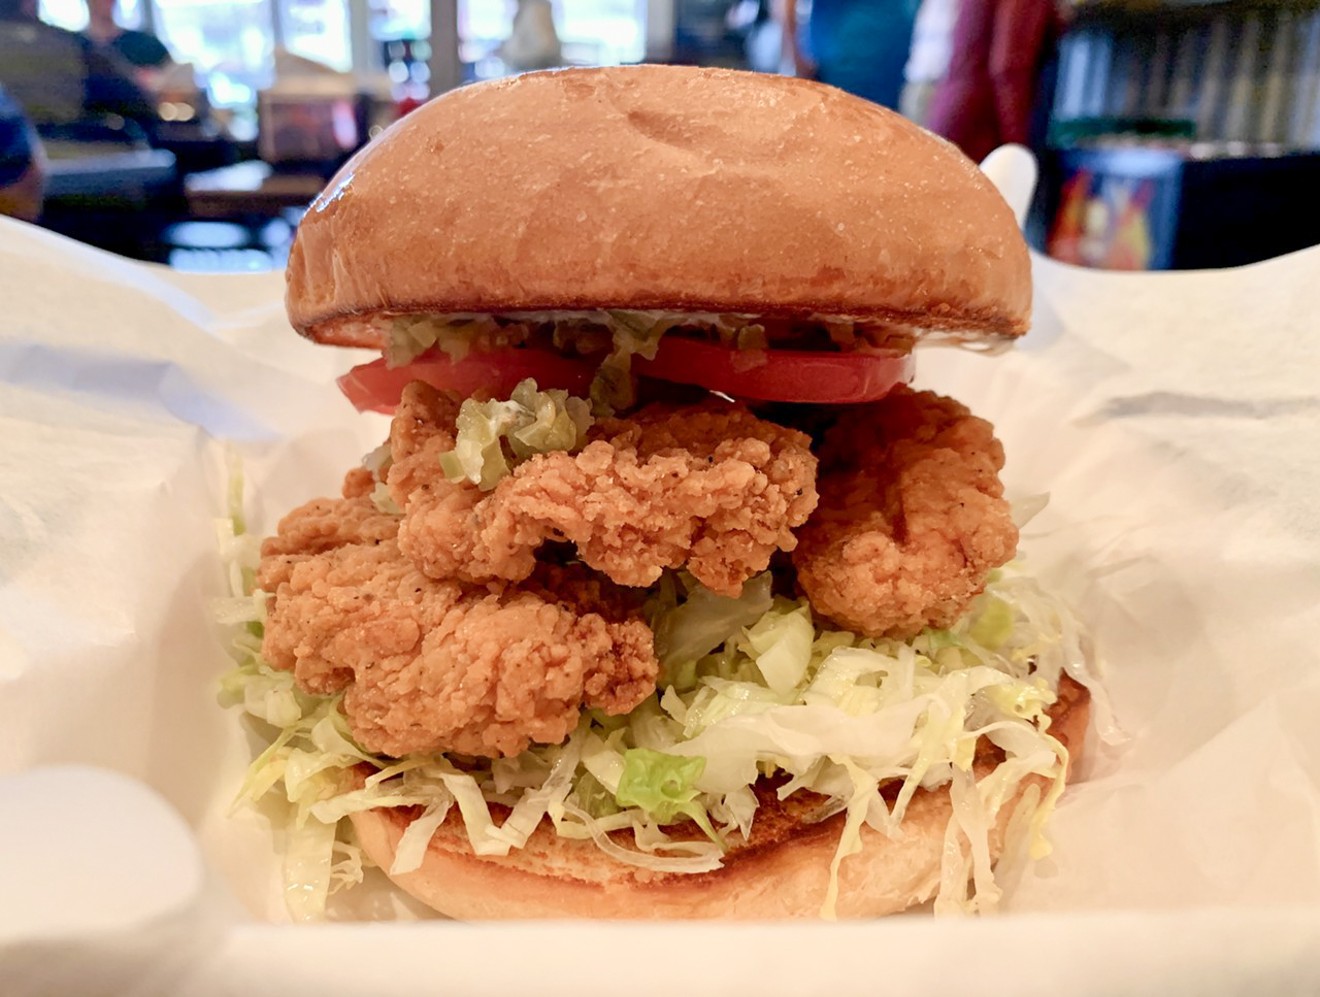 The $7.95 fried tenders sandwich at Maple and Motor with shredded lettuce, tomato and mayo